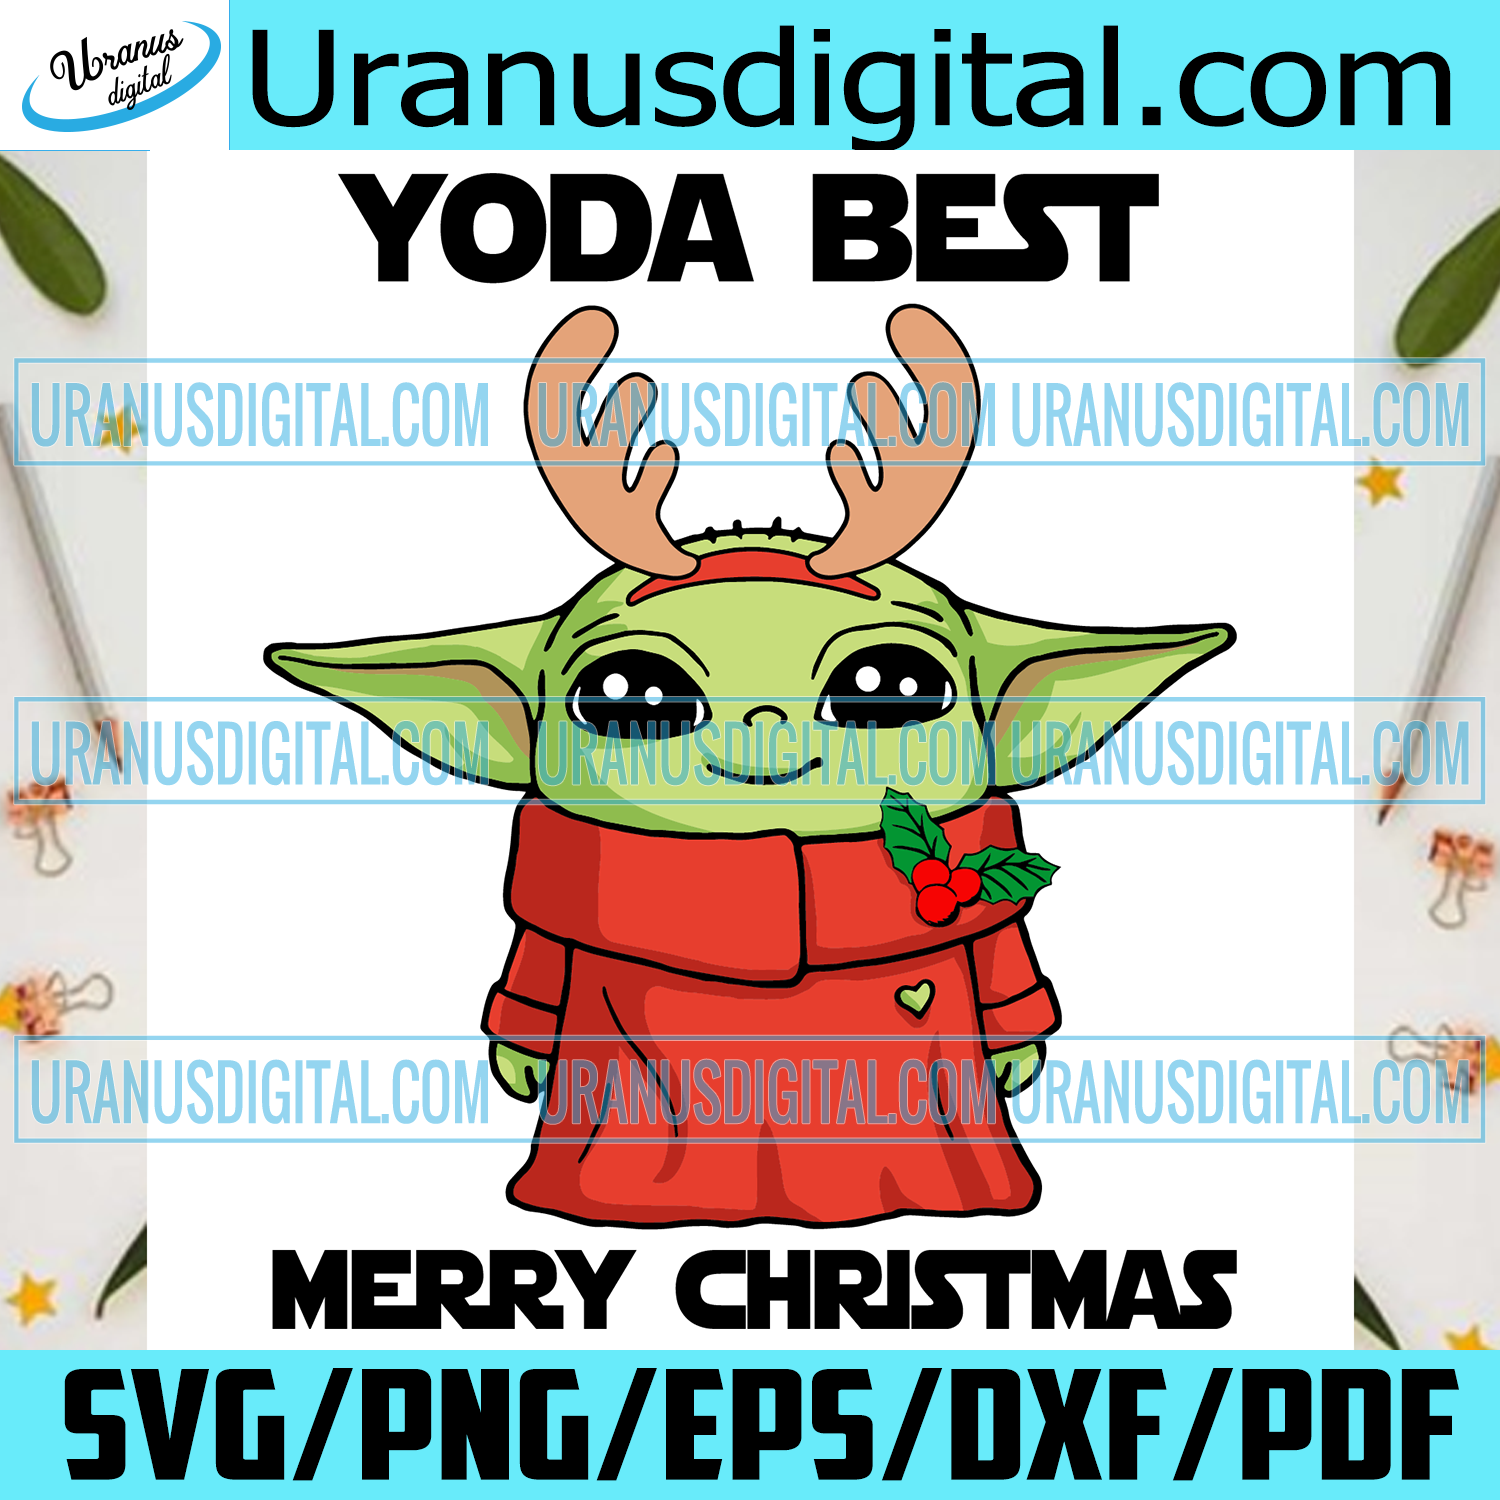 Download Yoda Best Merry Christmas Svg Christmas Svg Xmas Svg Merry Christma Uranusdigital